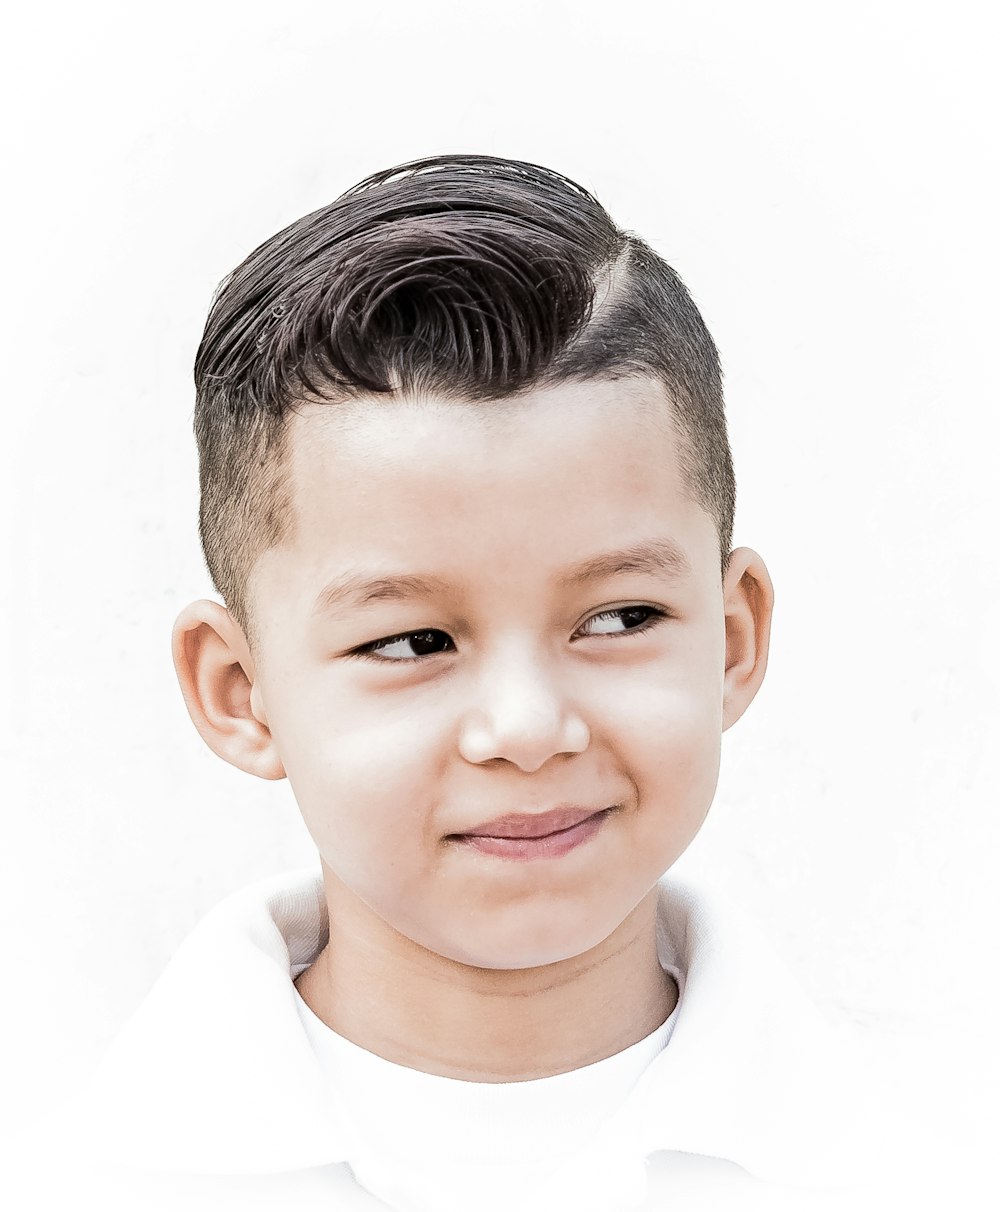 a young boy with a short haircut and a white shirt